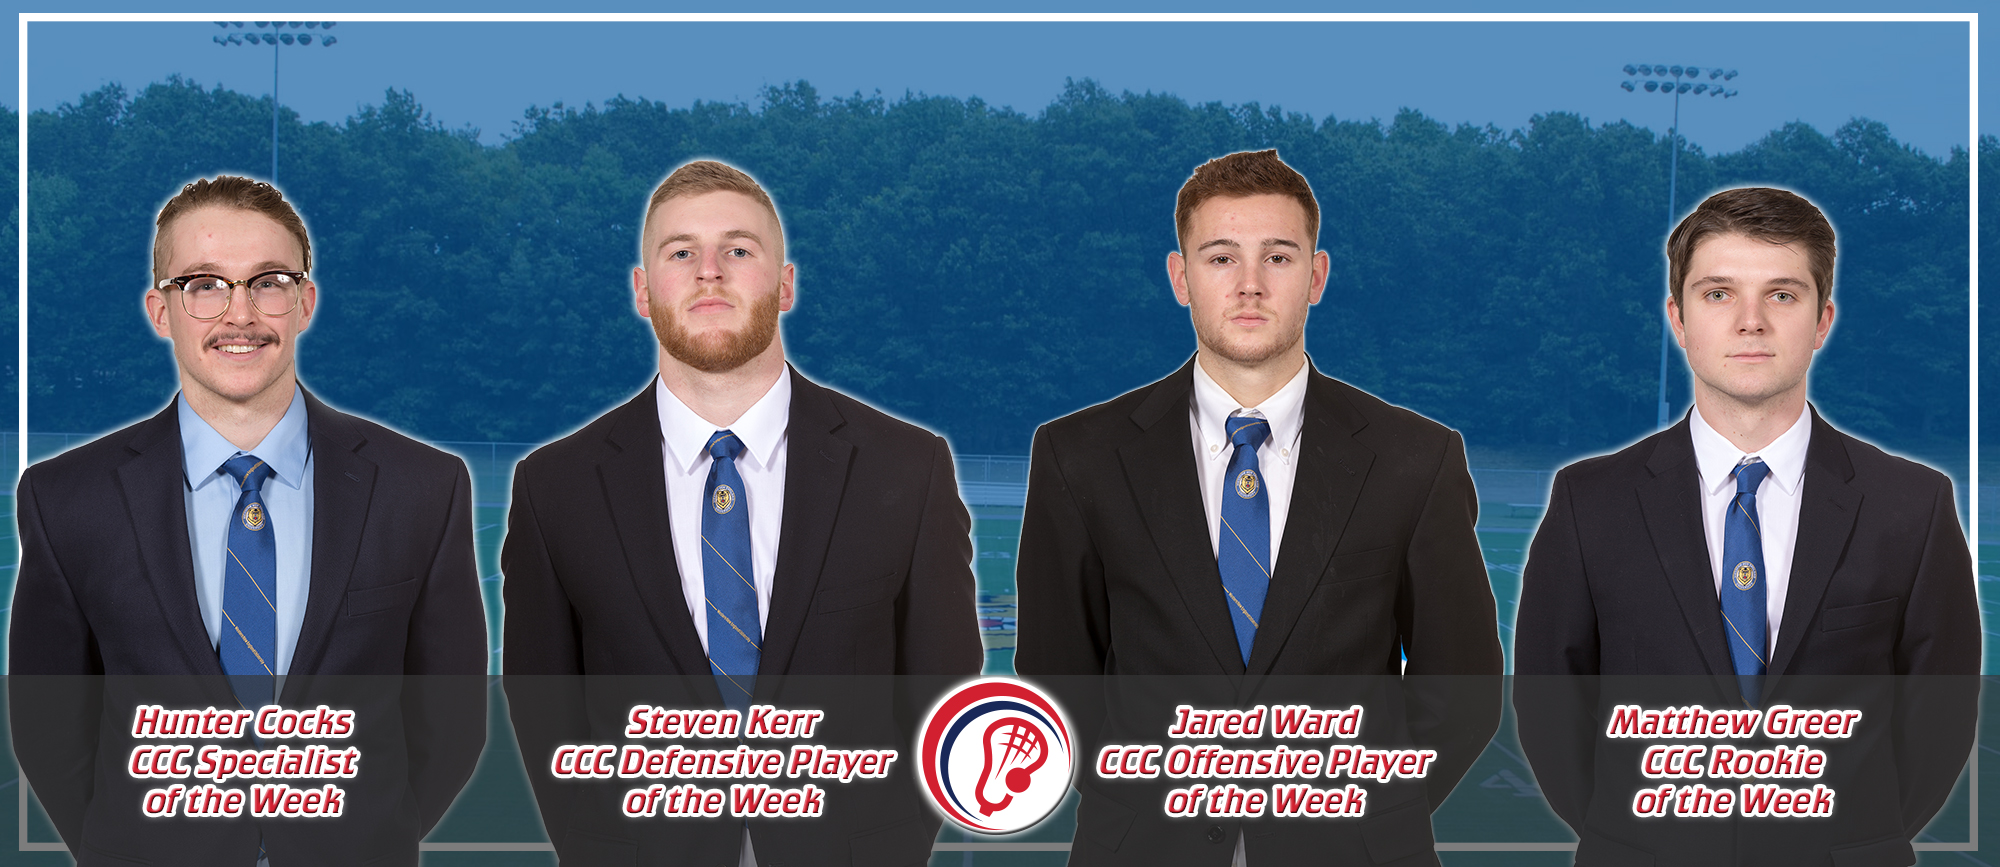 Western New England Sweeps CCC Weekly Awards Following Championship Run